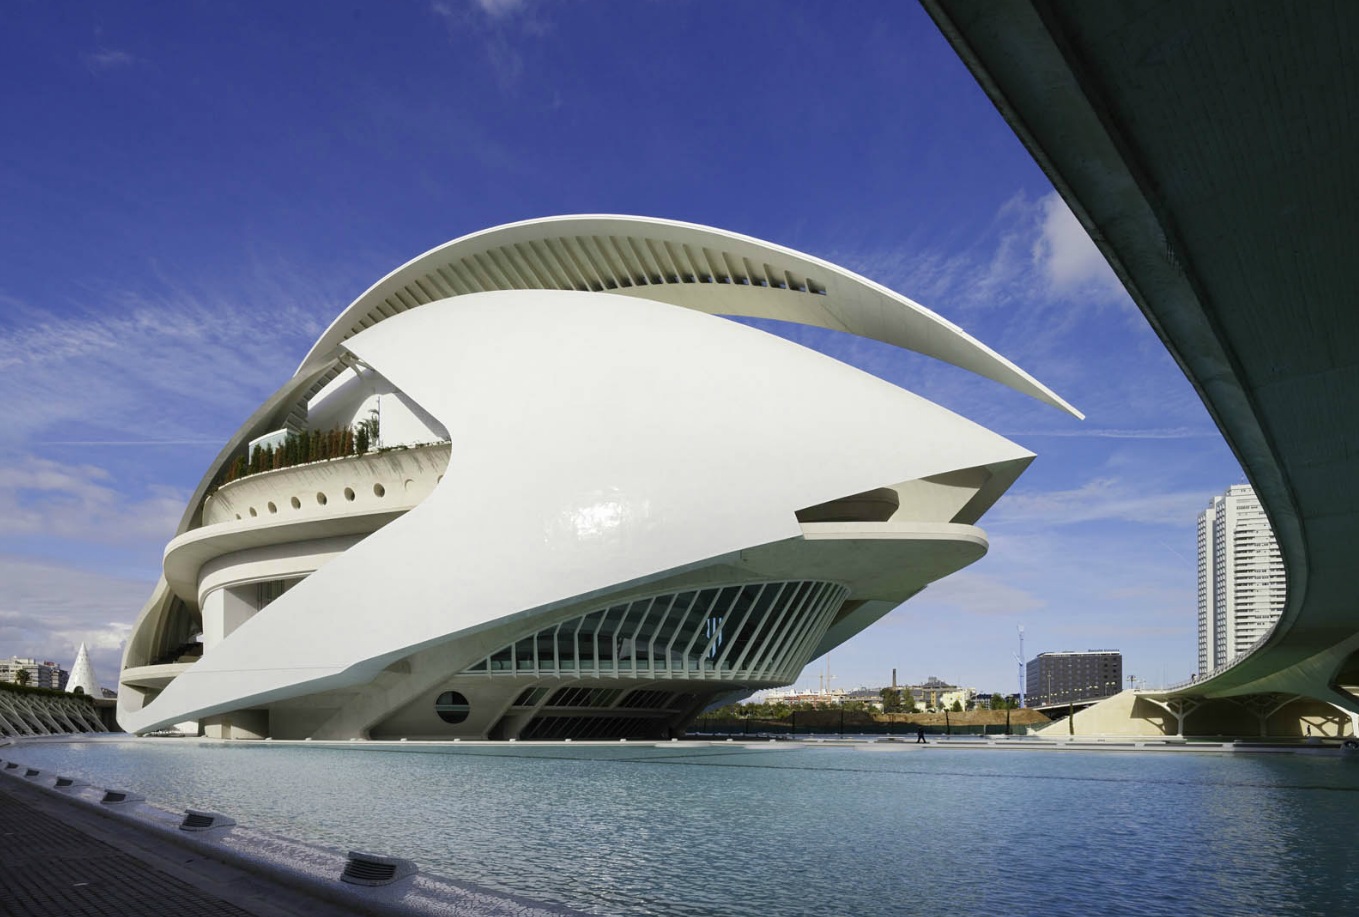 Why Cities Need To Stop Commissioning Calatrava’s Fish Skeletons